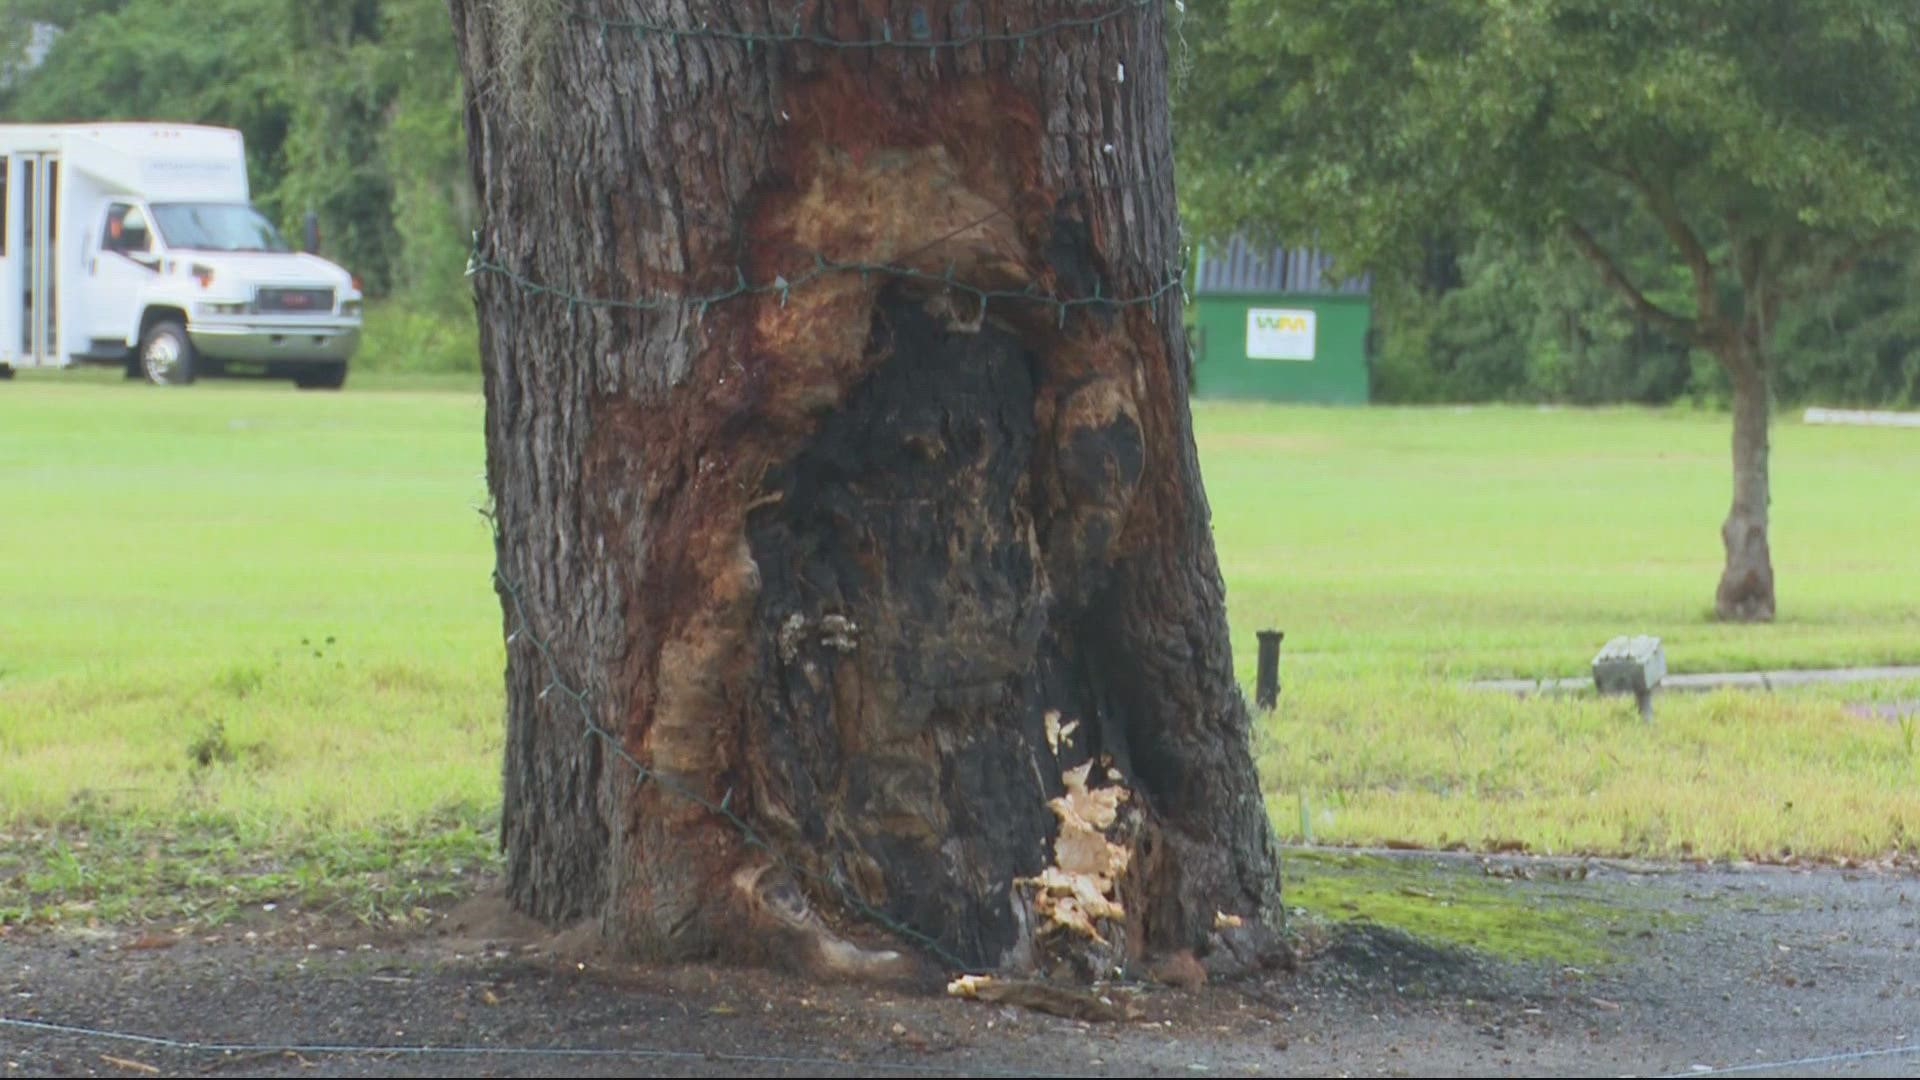 Local law enforcement are looking to save tree that keeps getting crashed into.